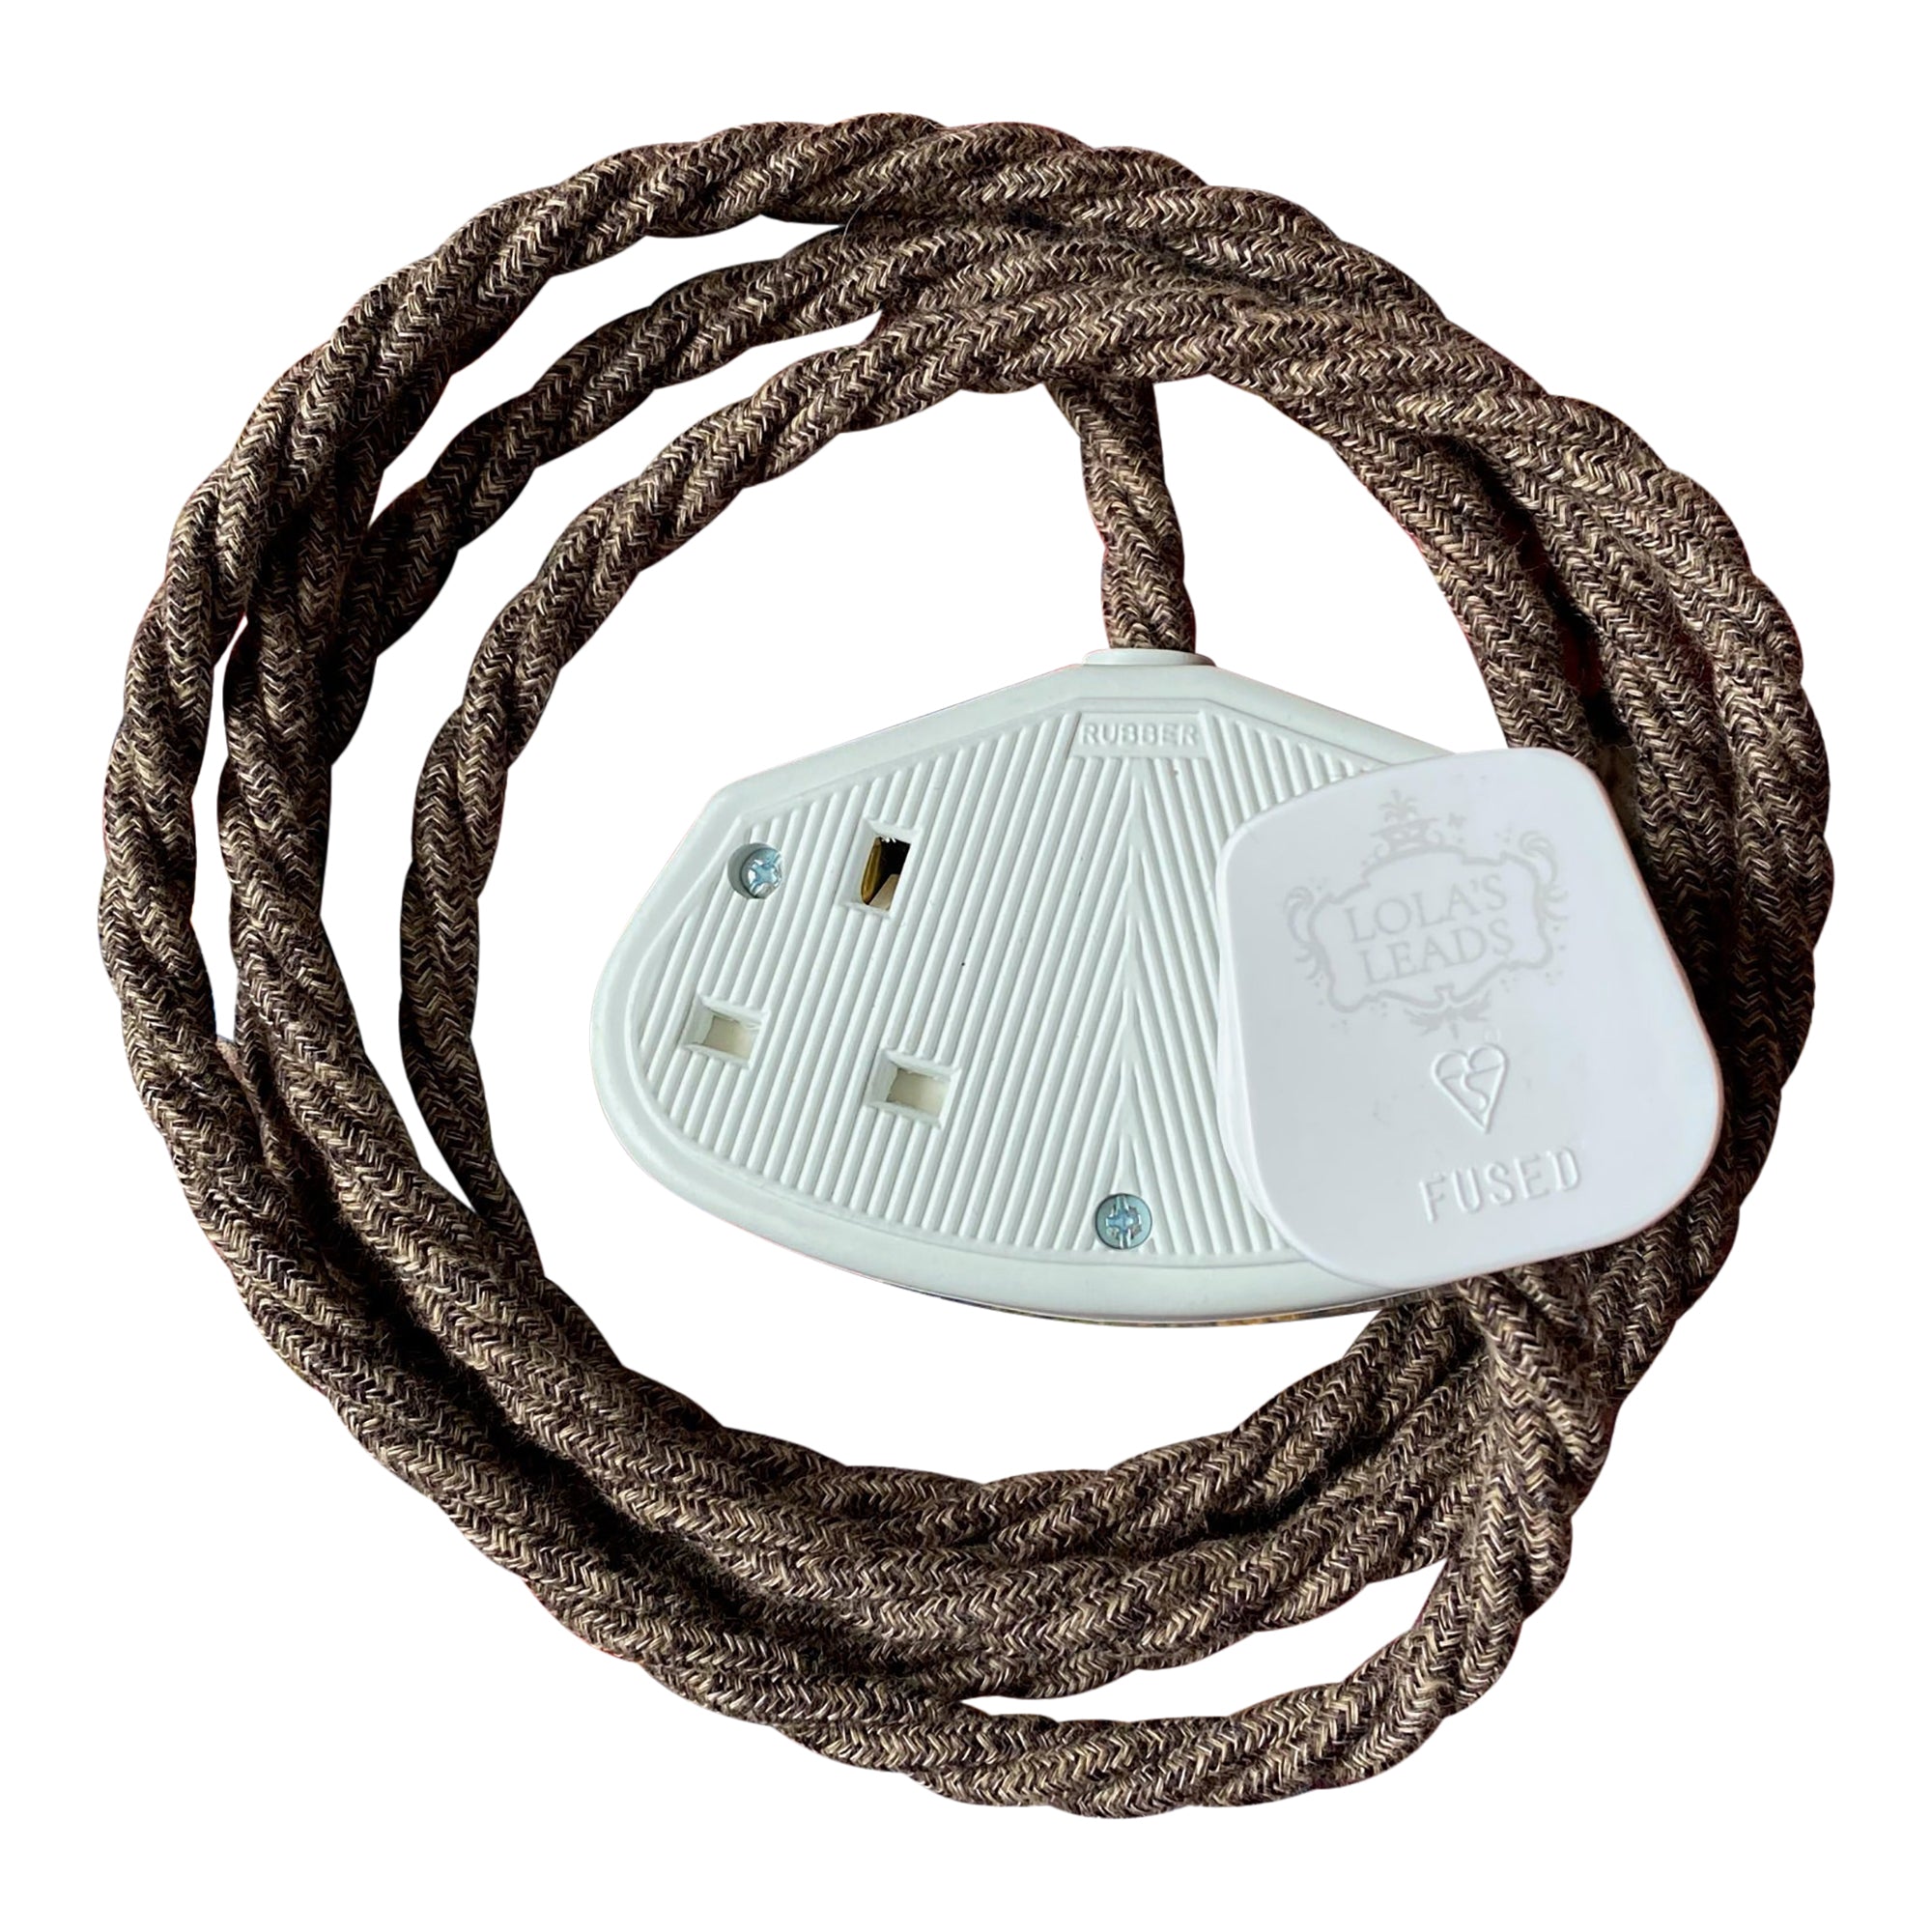 Mocha Linen - Lola's Leads Fabric Extension Cable